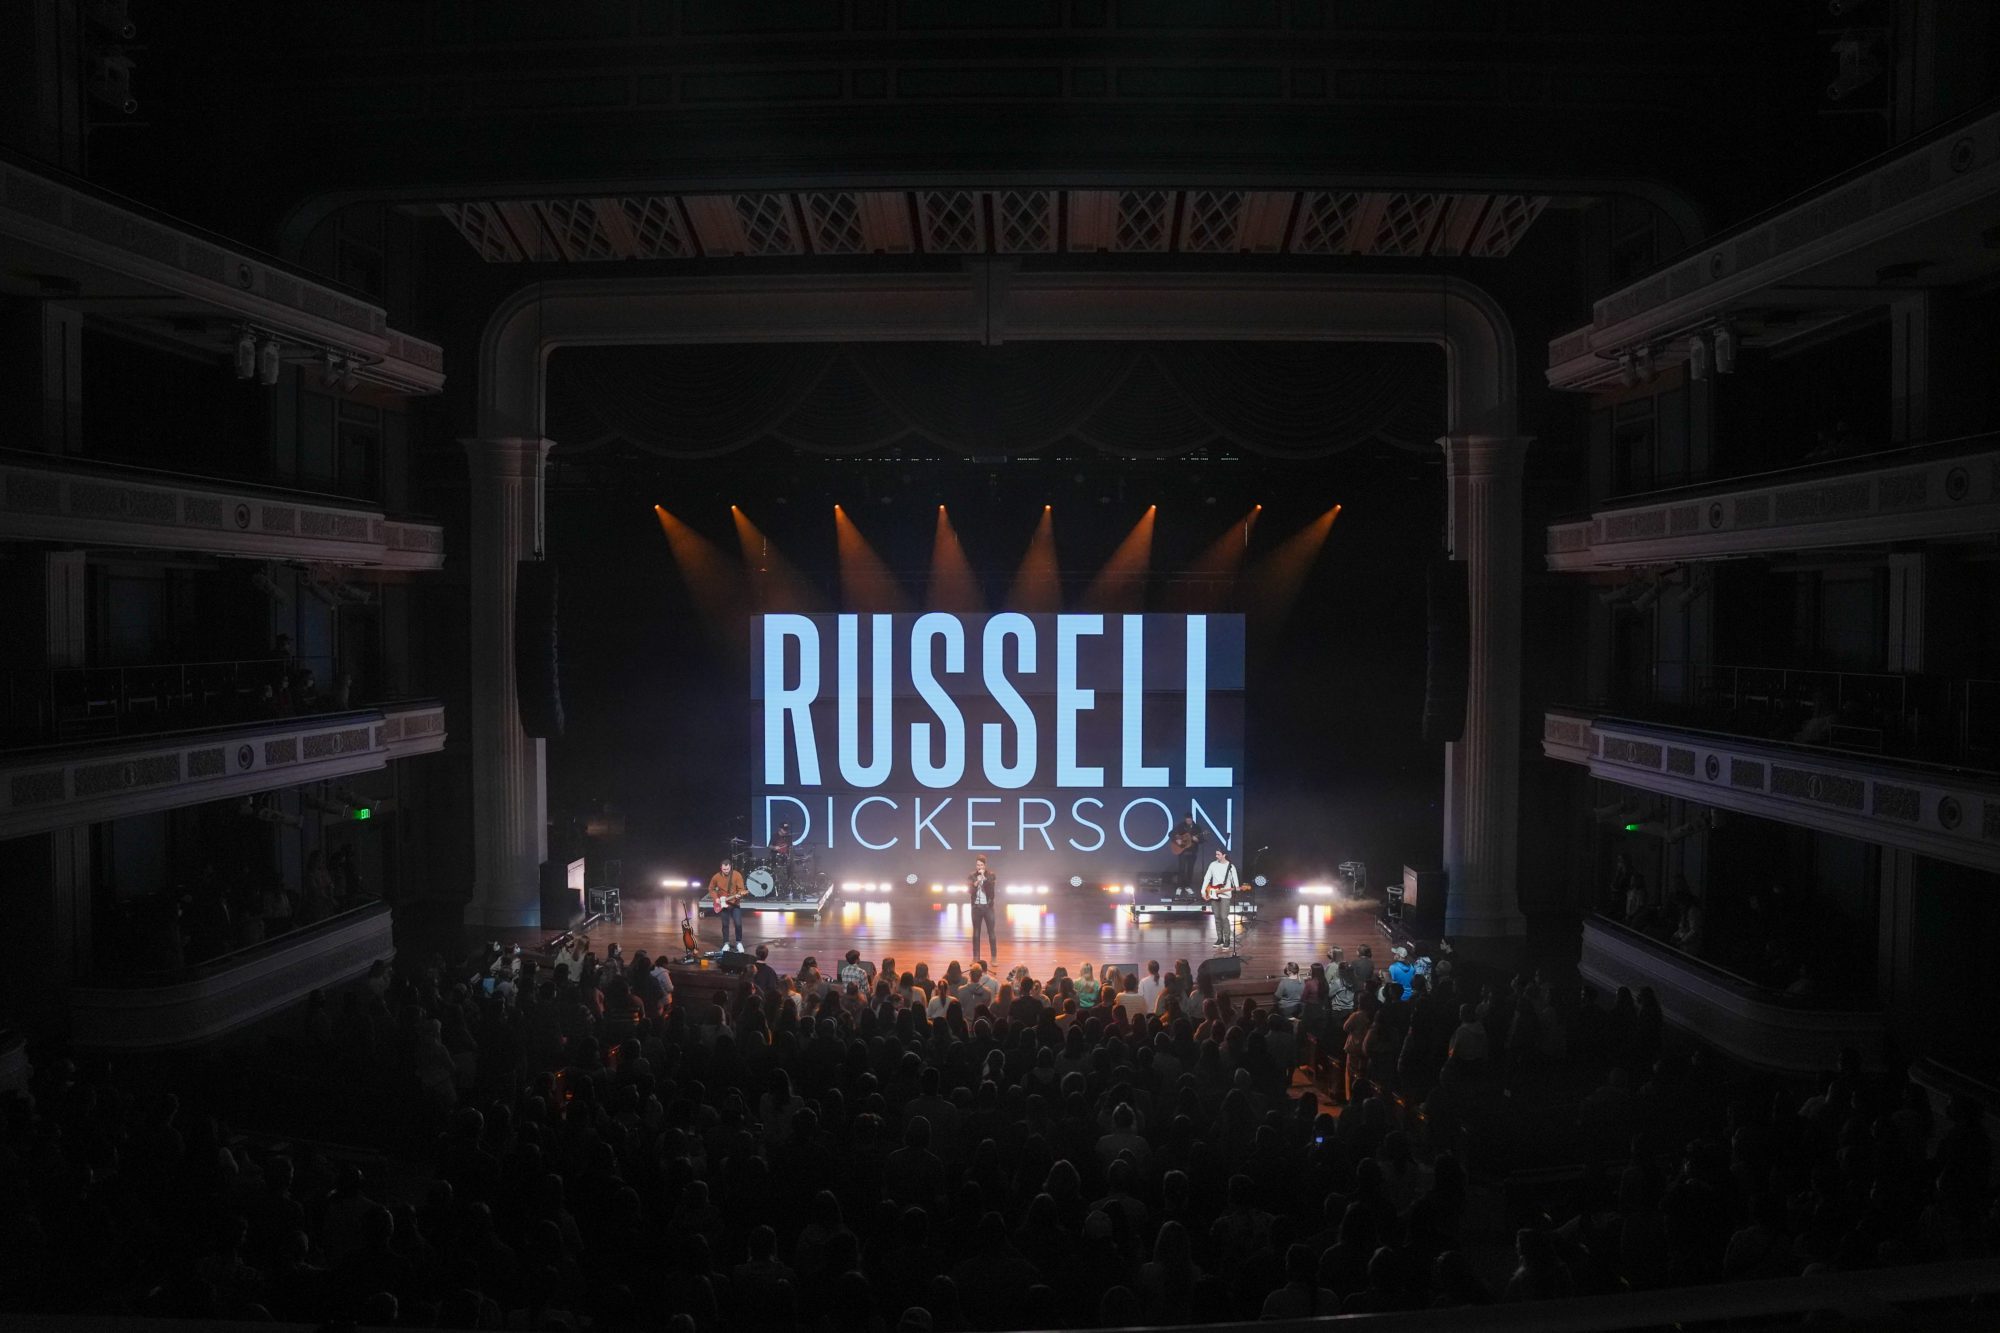 Russell Dickerson is awarded the Curtain Call Award at Belmont University in Nashville, Tennessee, on February 8, 2022.